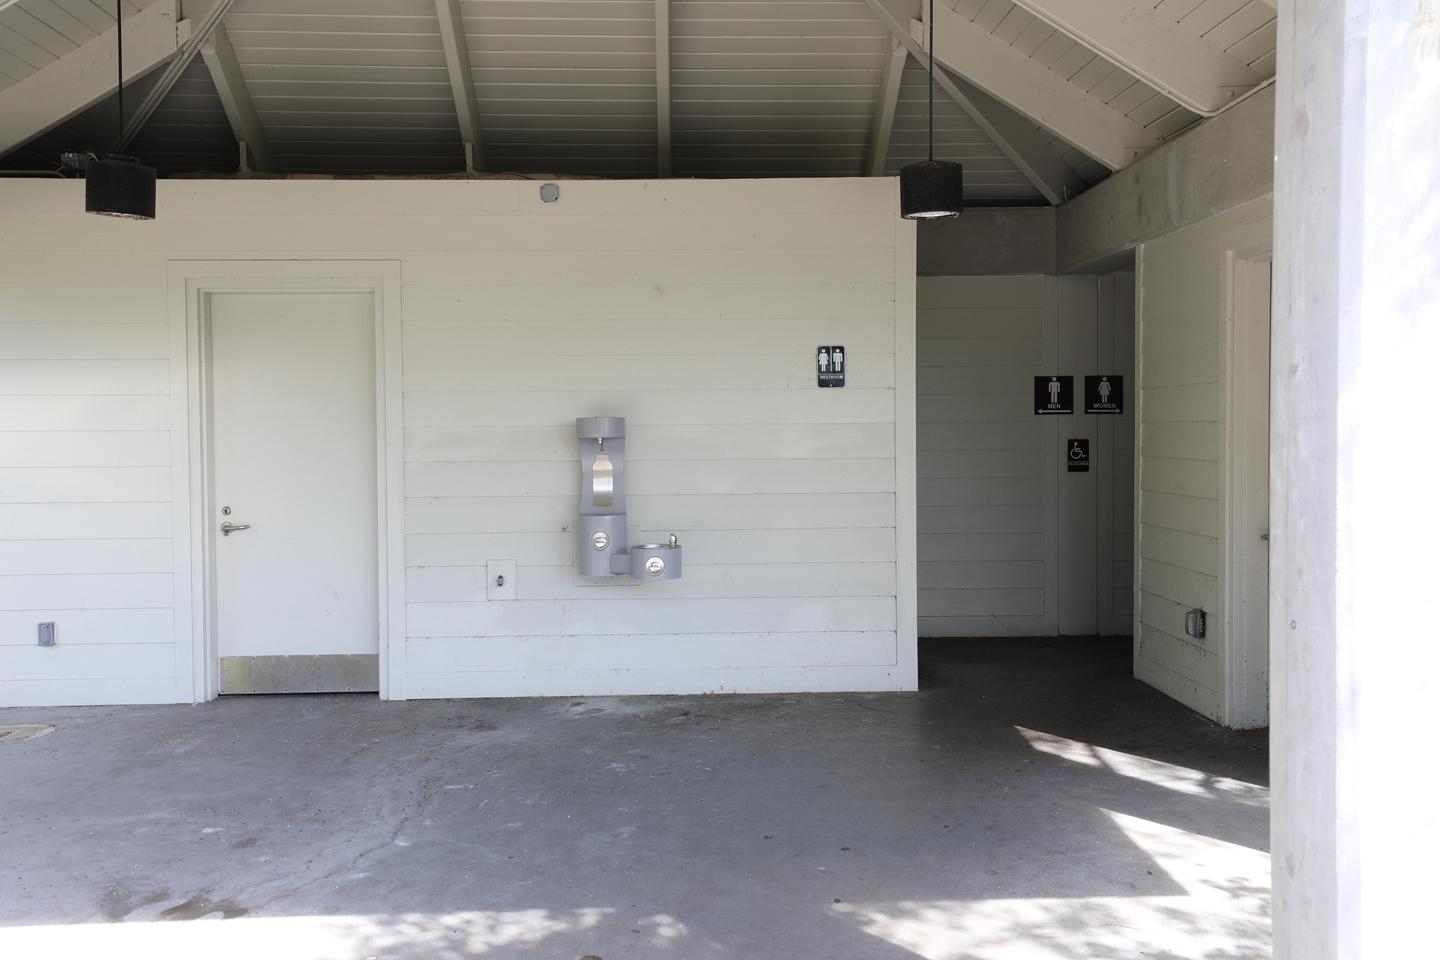 Restrooms and Water Fountains at Ernest Coe Visitor CenterFacilities at the Ernest Coe Visitor Center